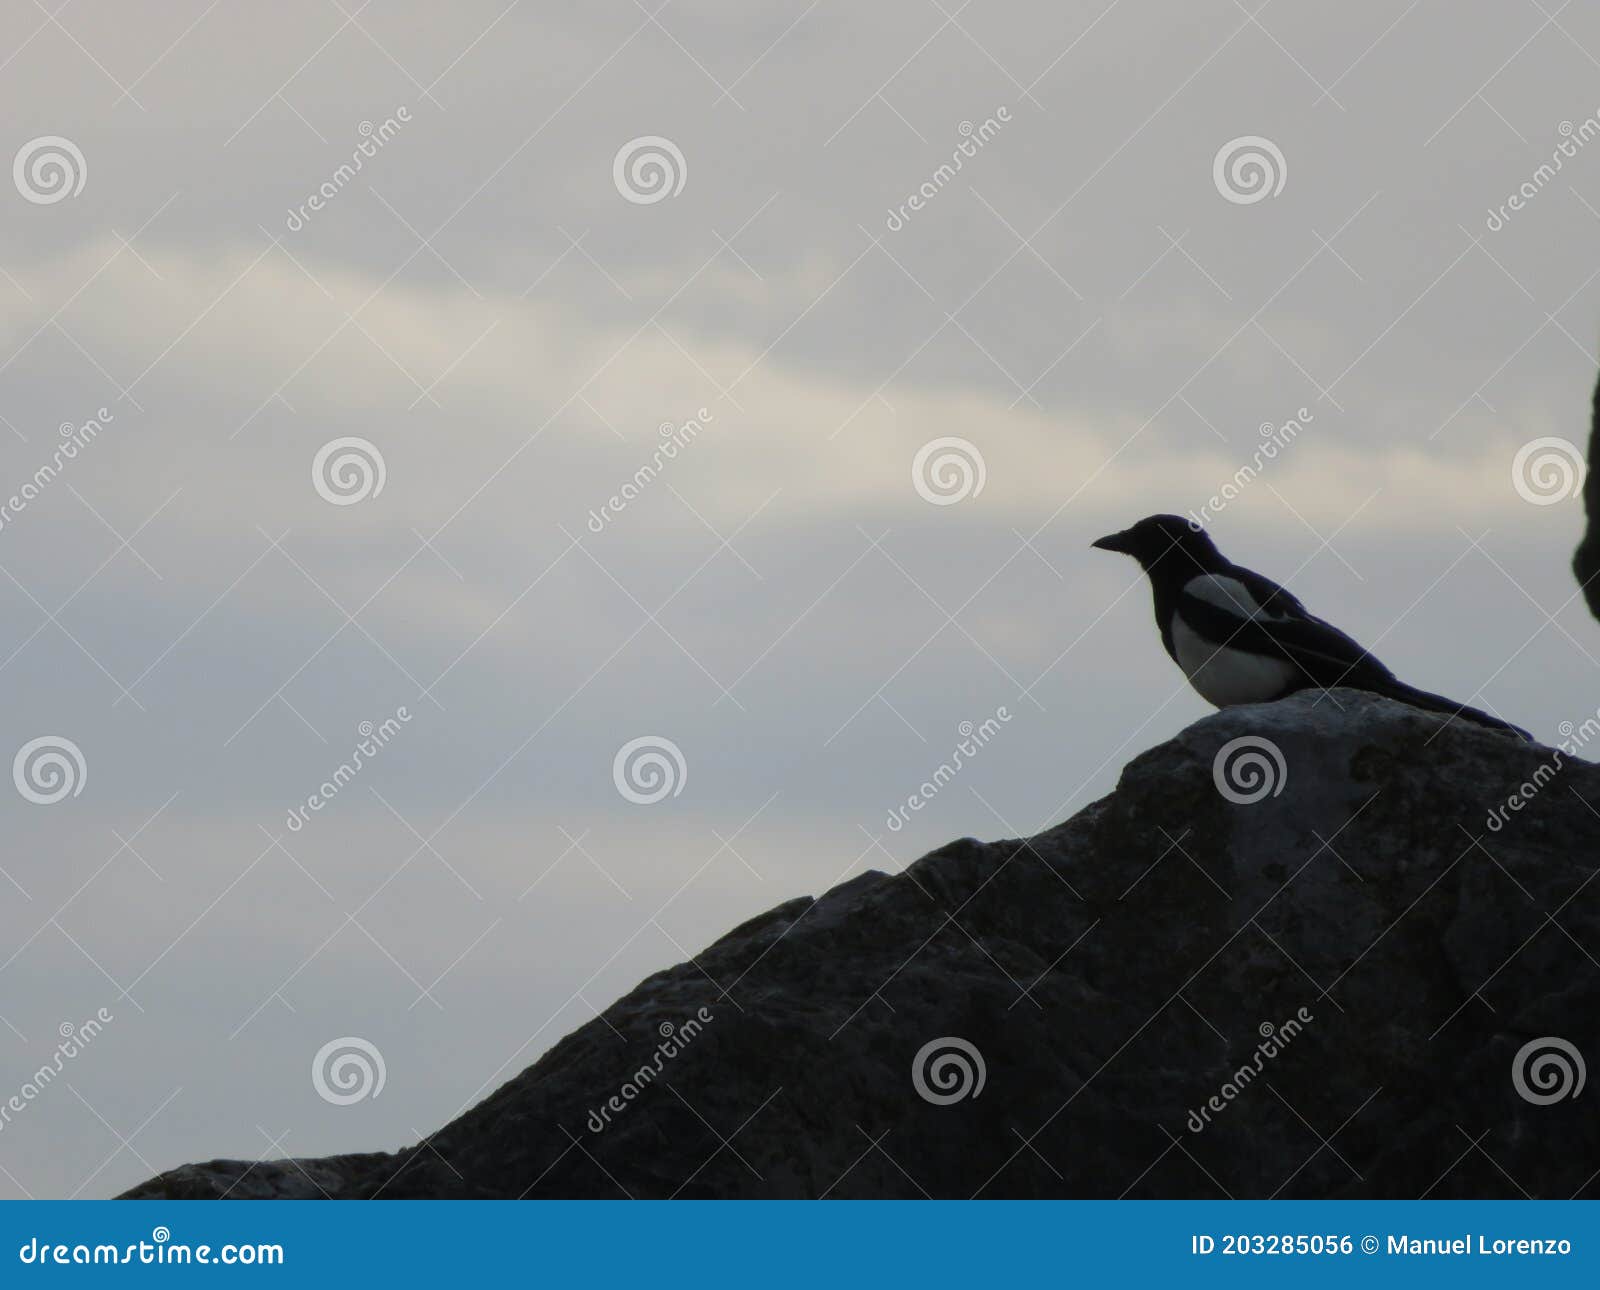 beautiful bird on the rock waiting for the moment to fly